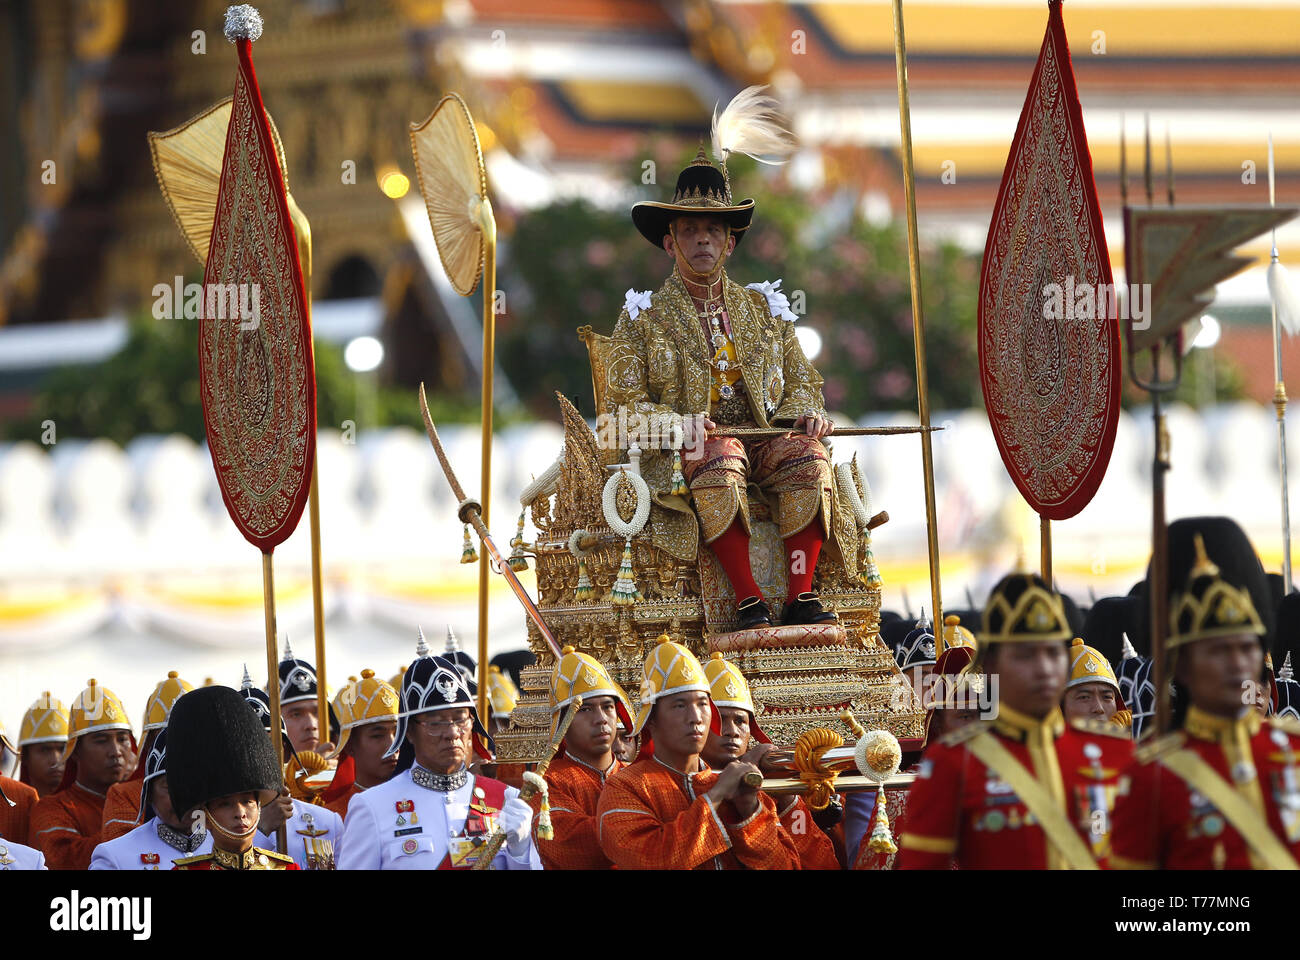 Bangkok, Thailand. 5th May, 2019. Thailand's King Maha Vajiralongkorn Bodindradebayavarangkun (Rama X) is carried in a golden palanquin during the coronation procession on land to encircle the city to give the people the opportunity to attend and pay homage to their new King. Credit: Chaiwat Subprasom/SOPA Images/ZUMA Wire/Alamy Live News Stock Photo